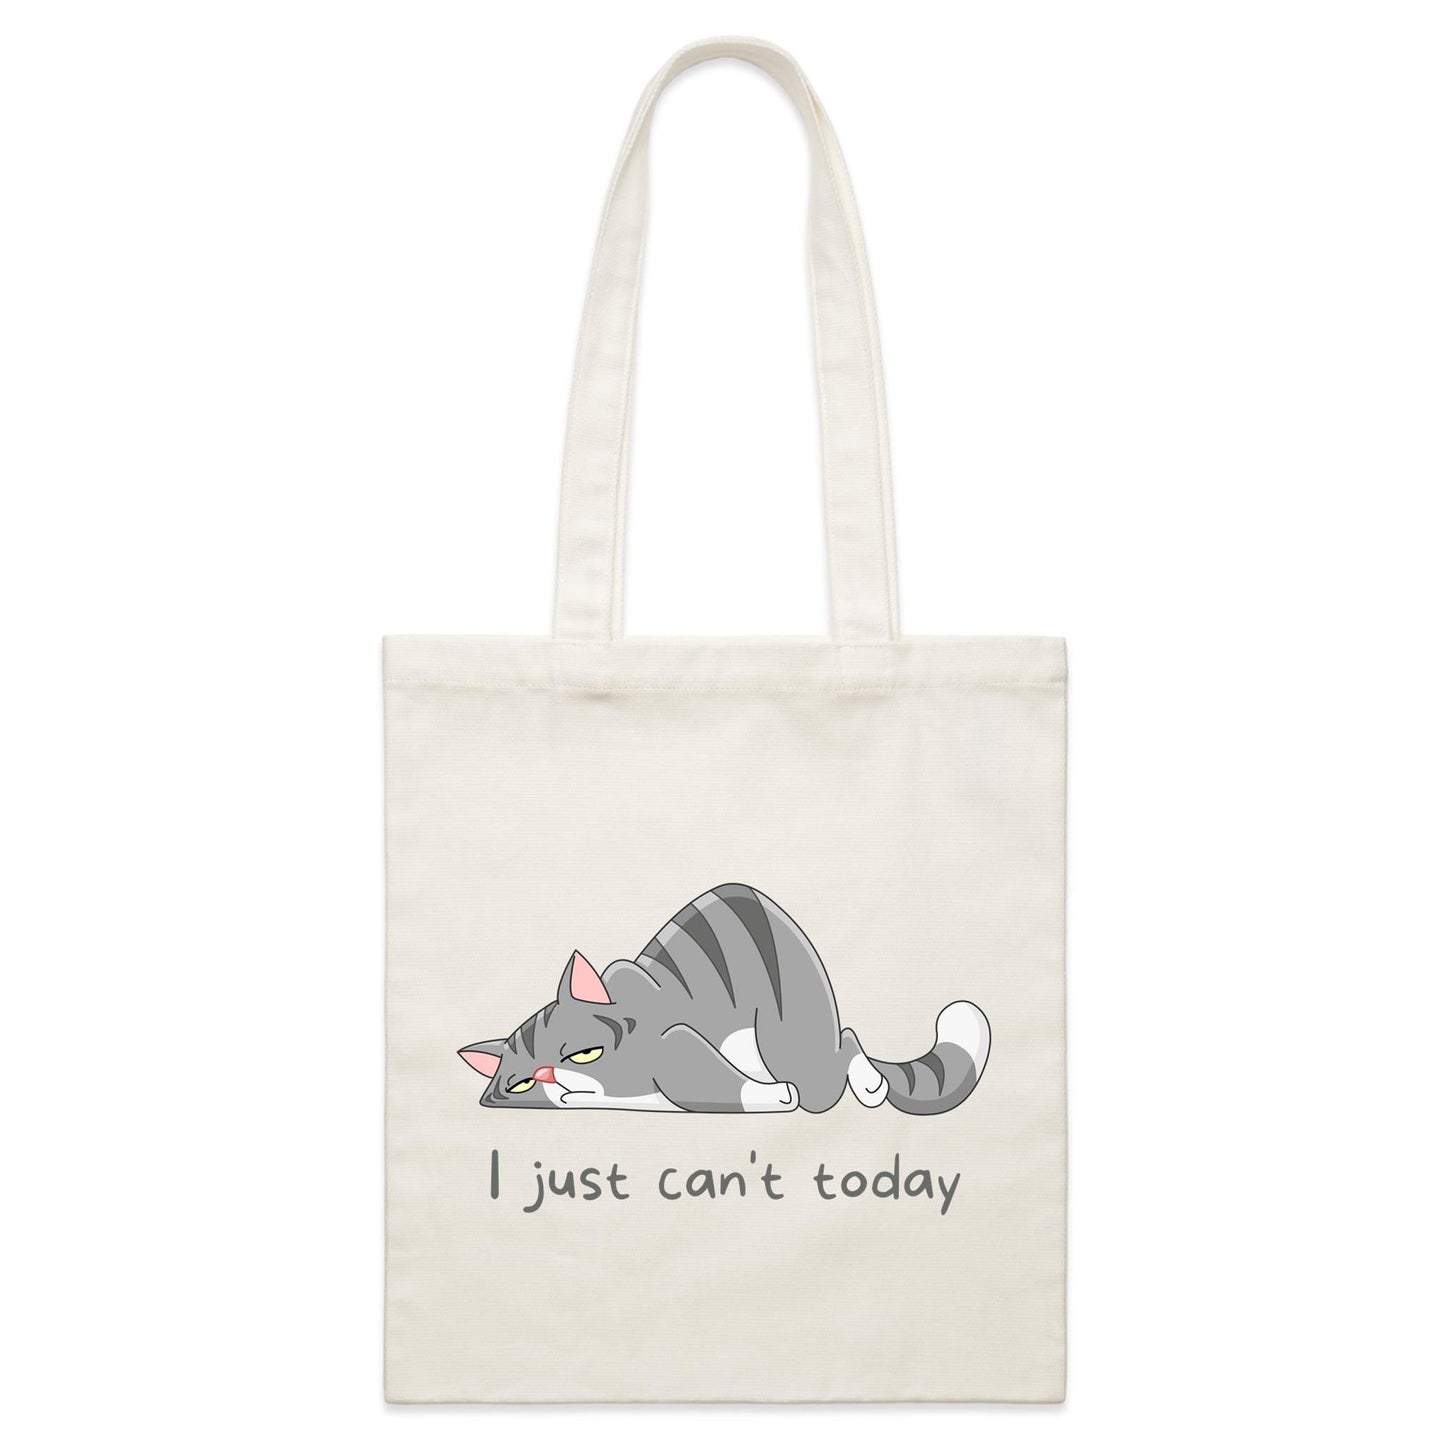 Cat, I Just Can't Today - Parcel Canvas Tote Bag Default Title Parcel Tote Bag animal